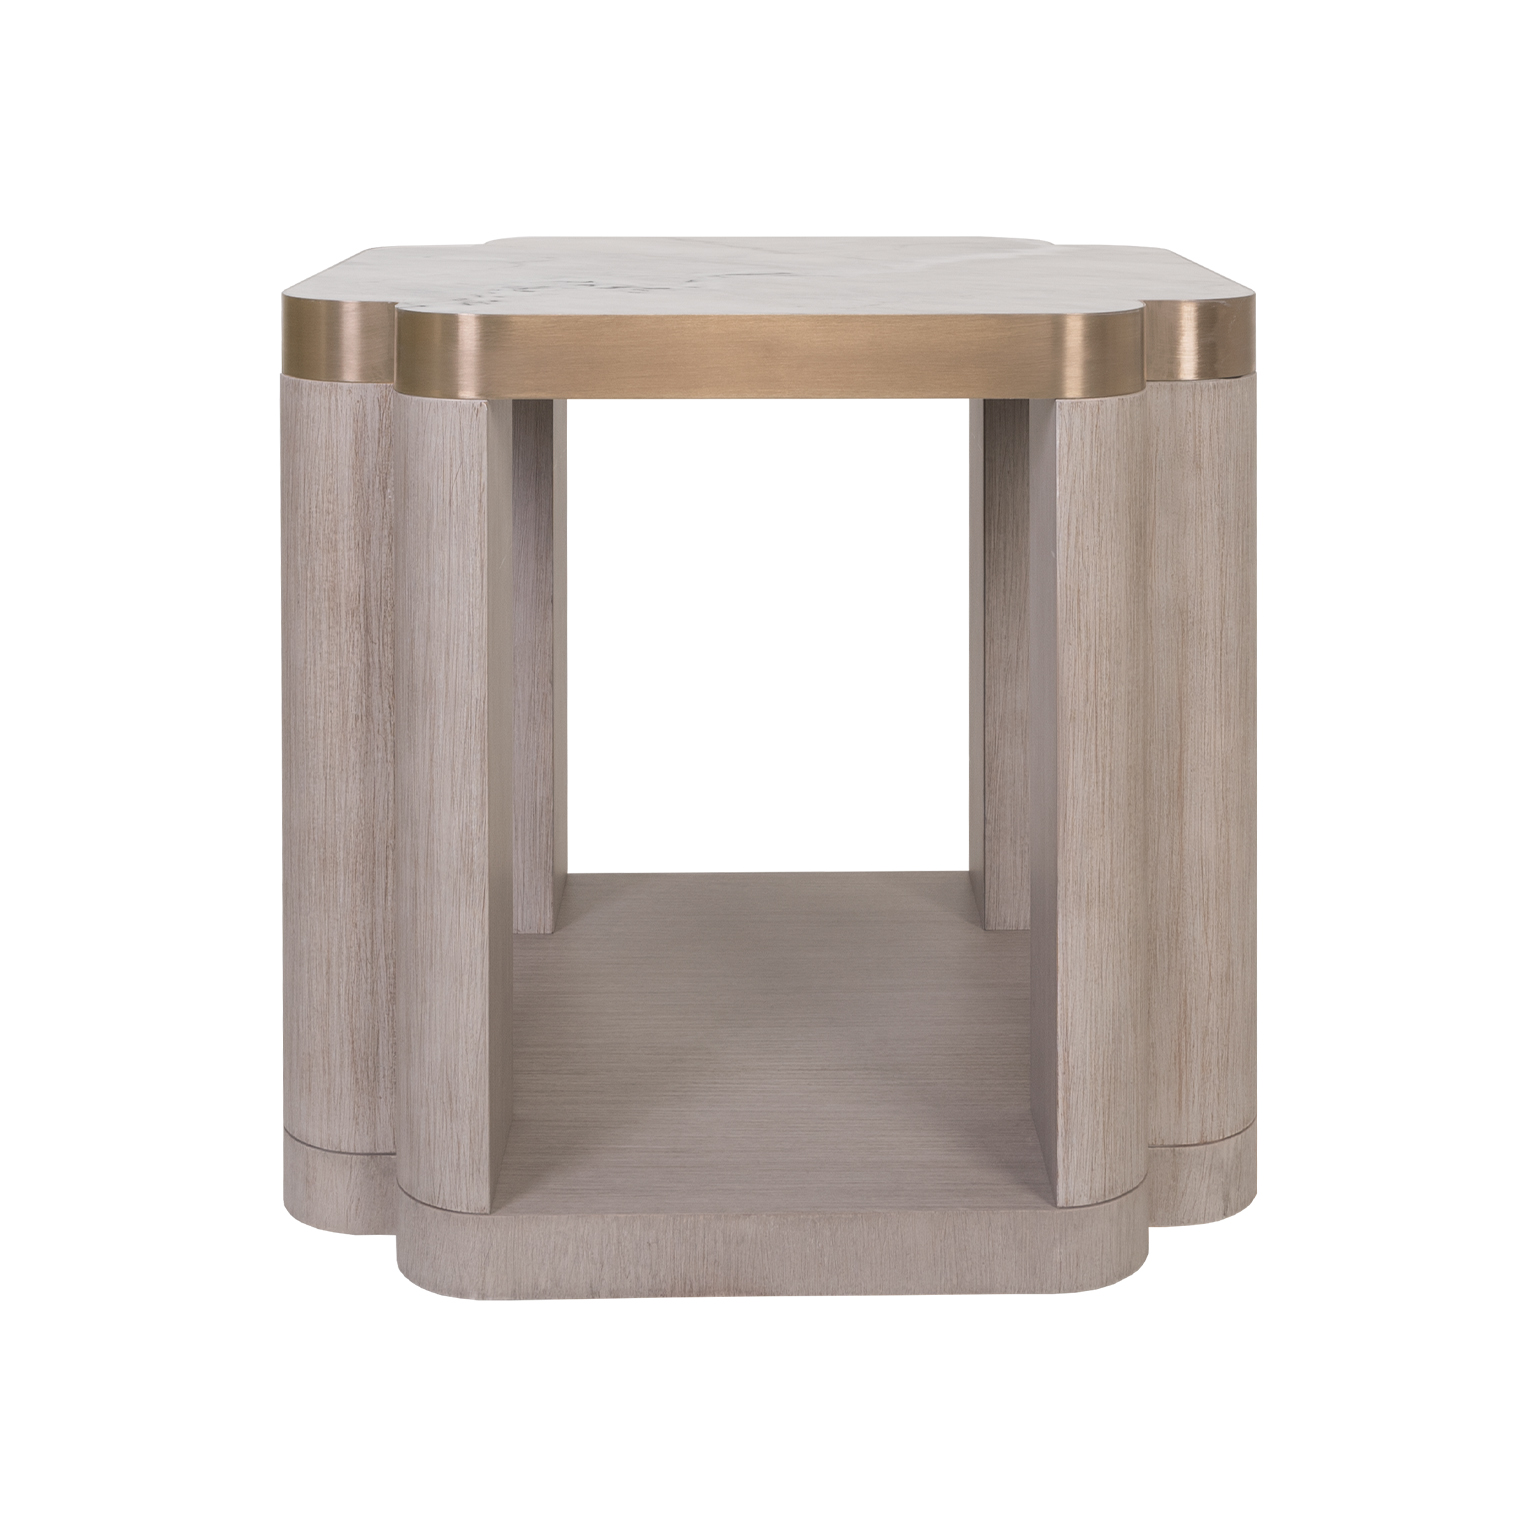 Ebony side table with marble top, wrapped in smoked brass